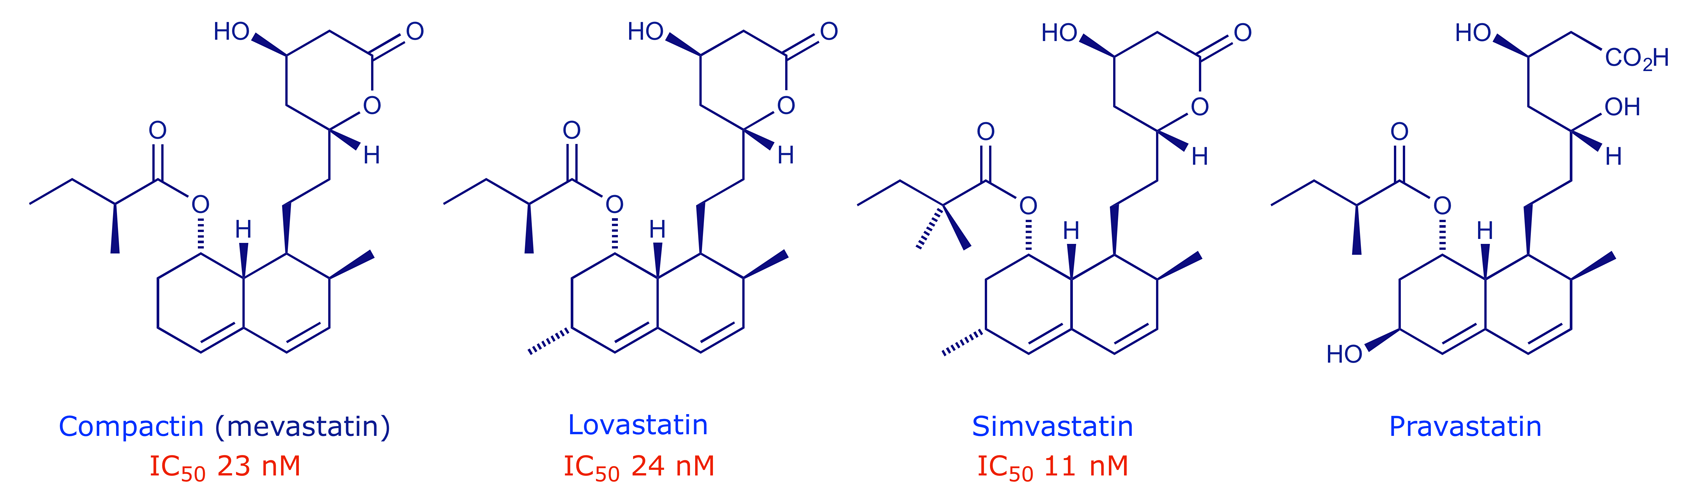 Structures of the lead compound compactin and related HMGR inhibitors